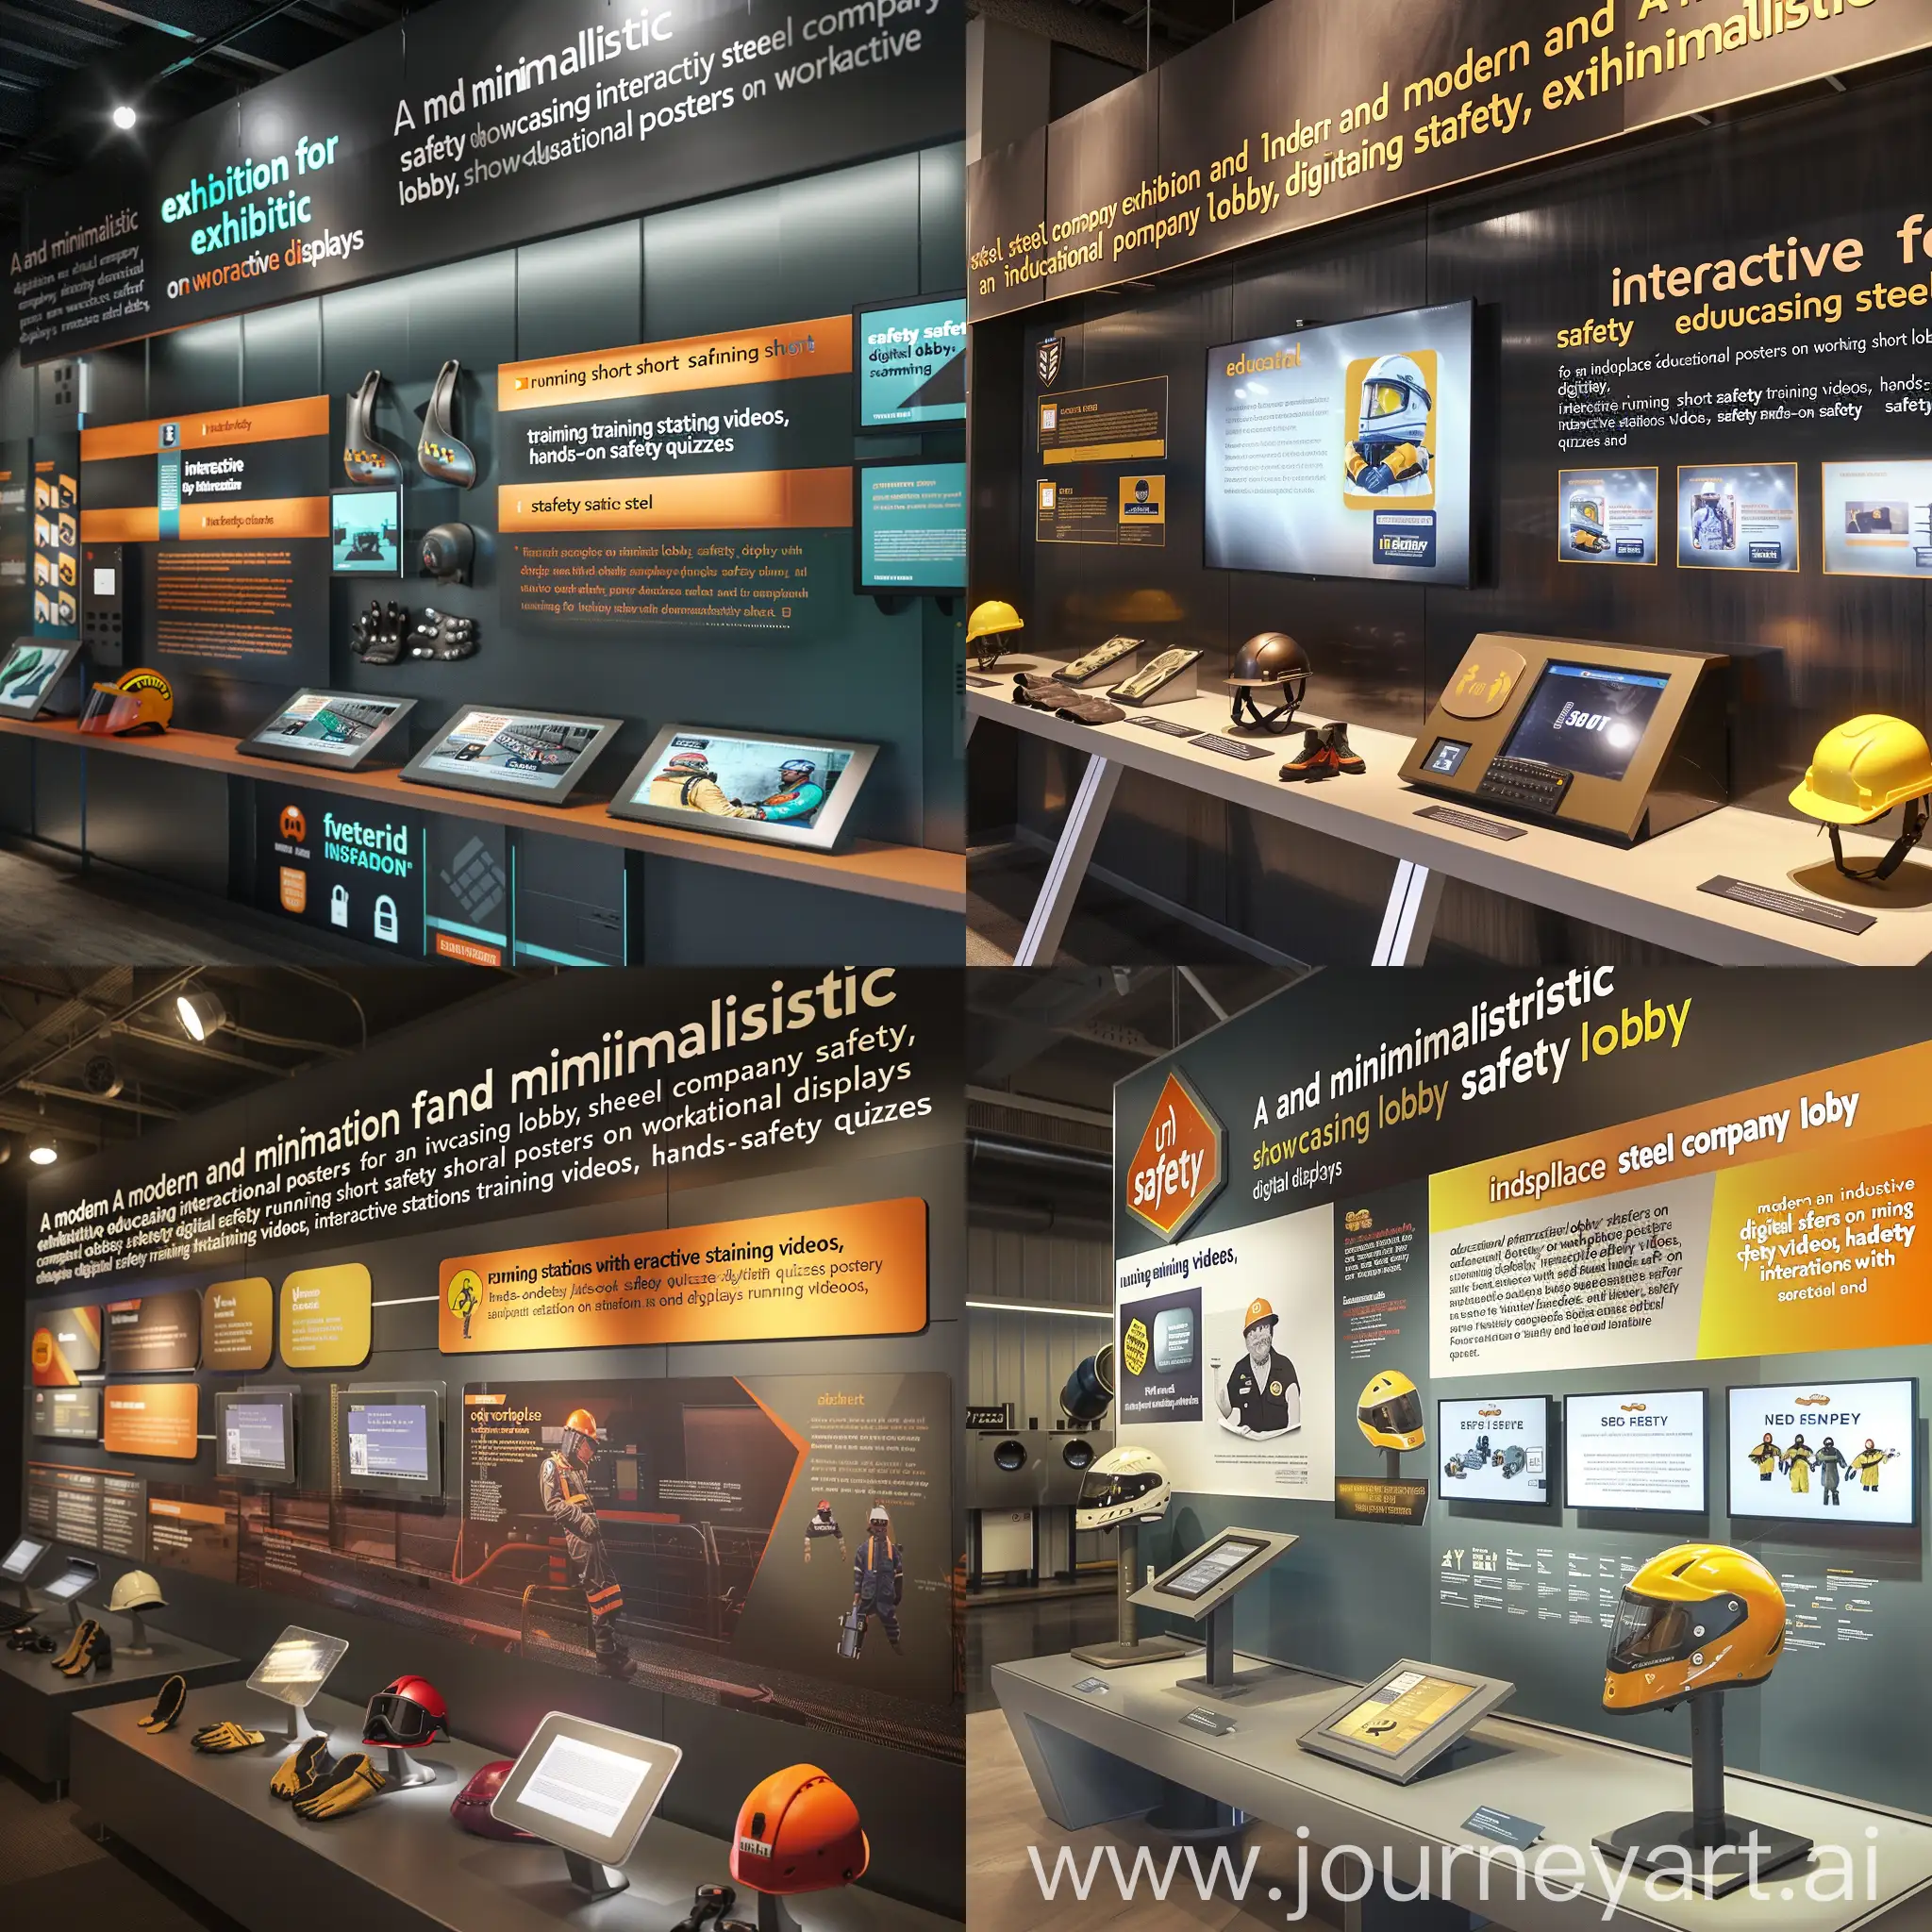 Innovative-Workplace-Safety-Exhibition-Interactive-Displays-Training